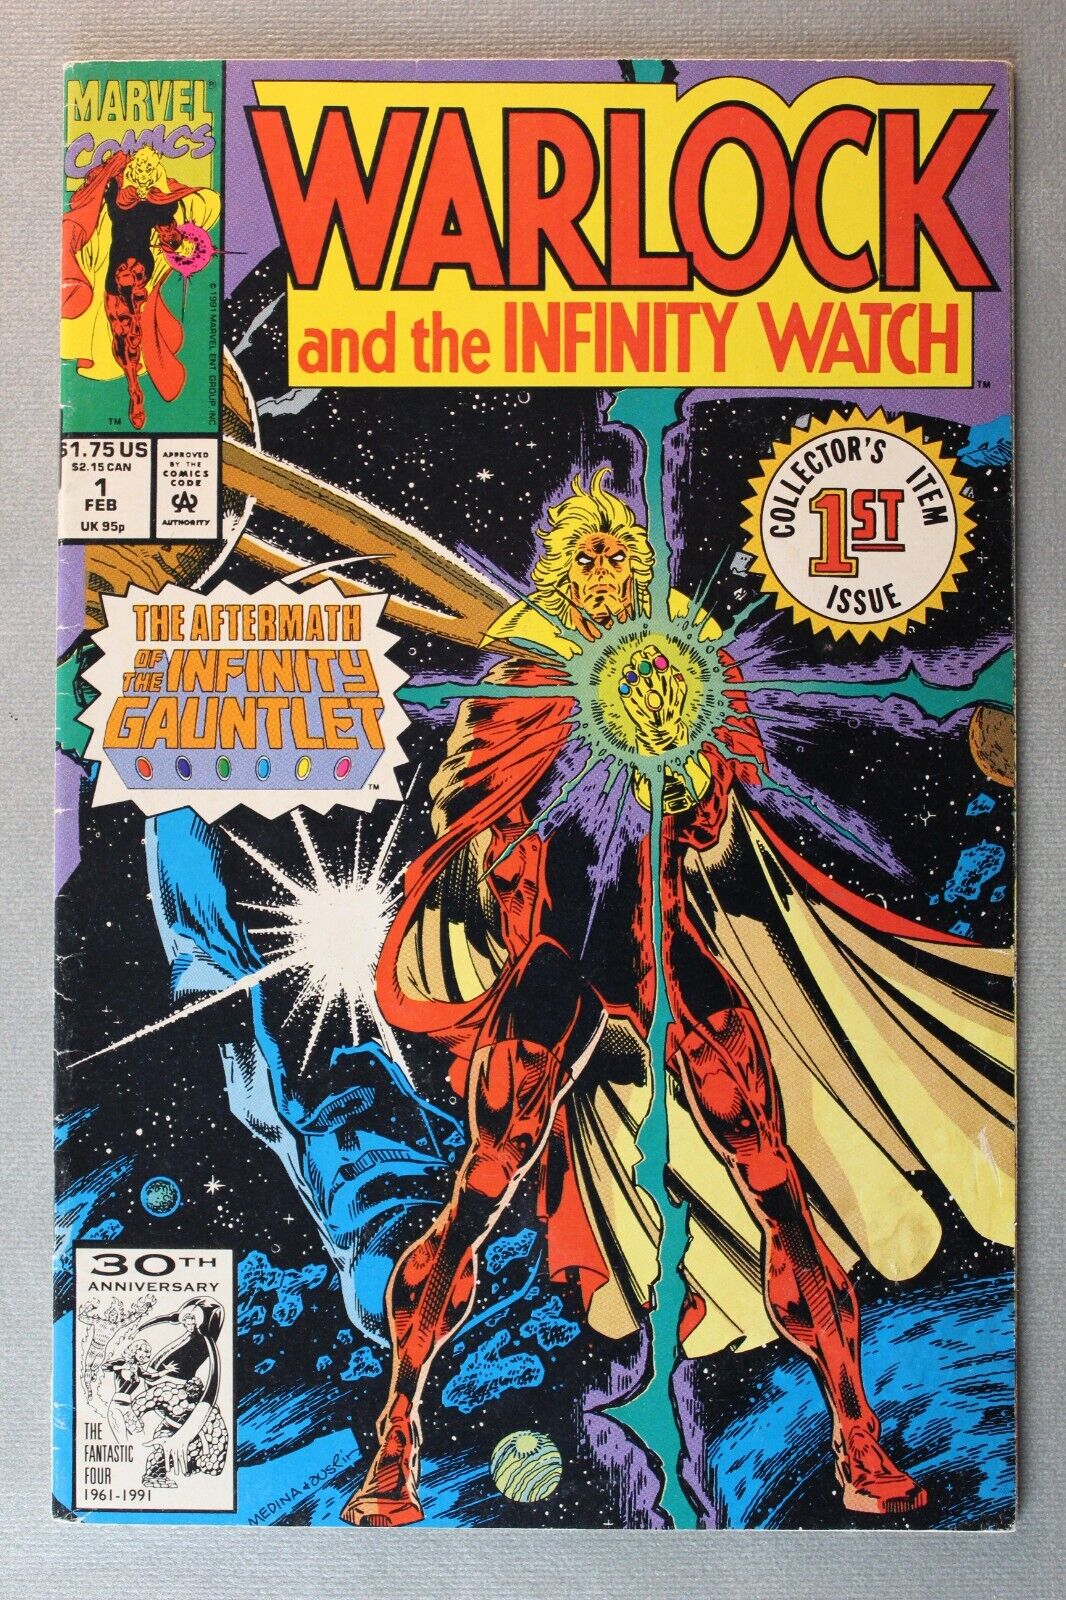 Warlock and the Infinity Watch #1 *1992* The Aftermath Of The Infinity Gauntlet